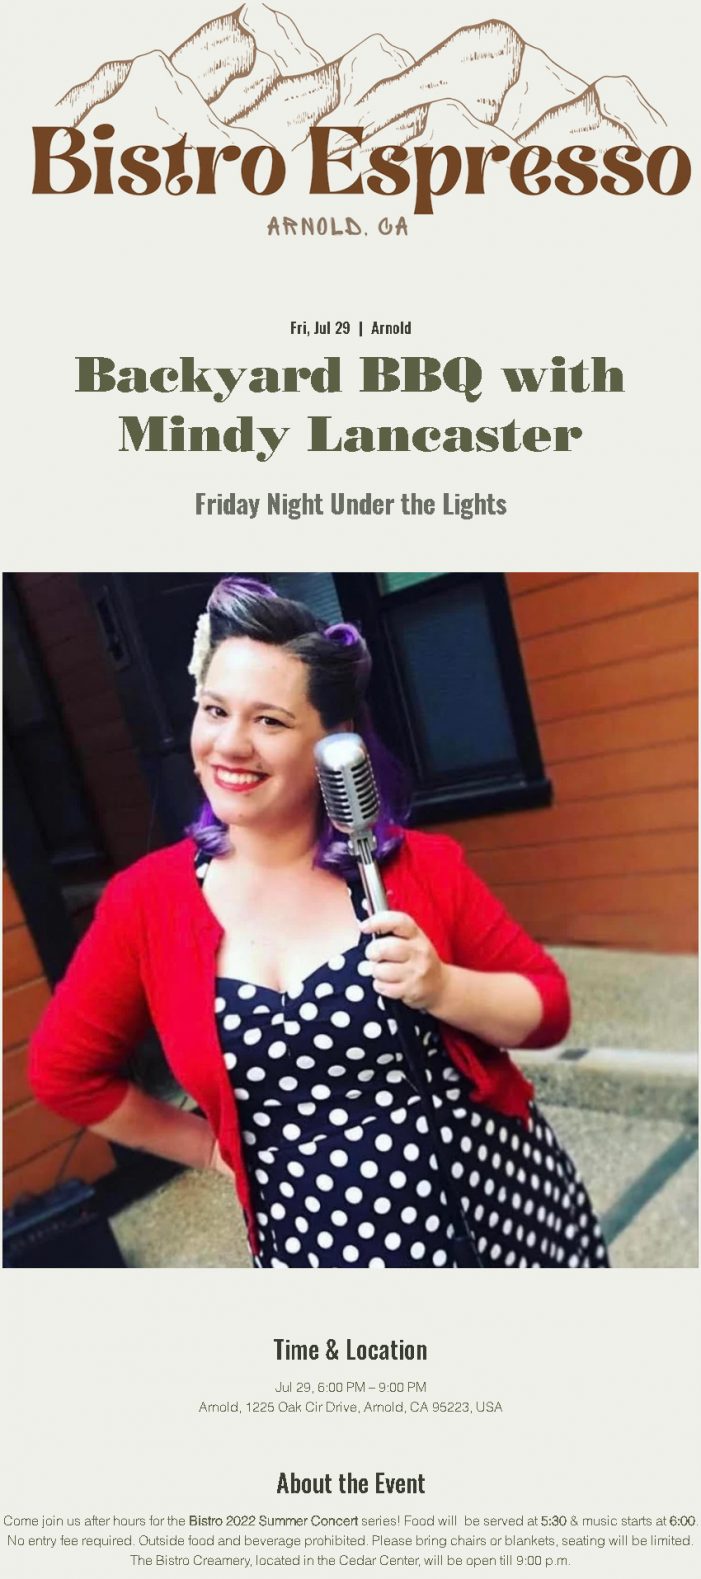 Friday Night Under the Lights, Backyard BBQ with Mindy Lancaster at Bistro Espresso